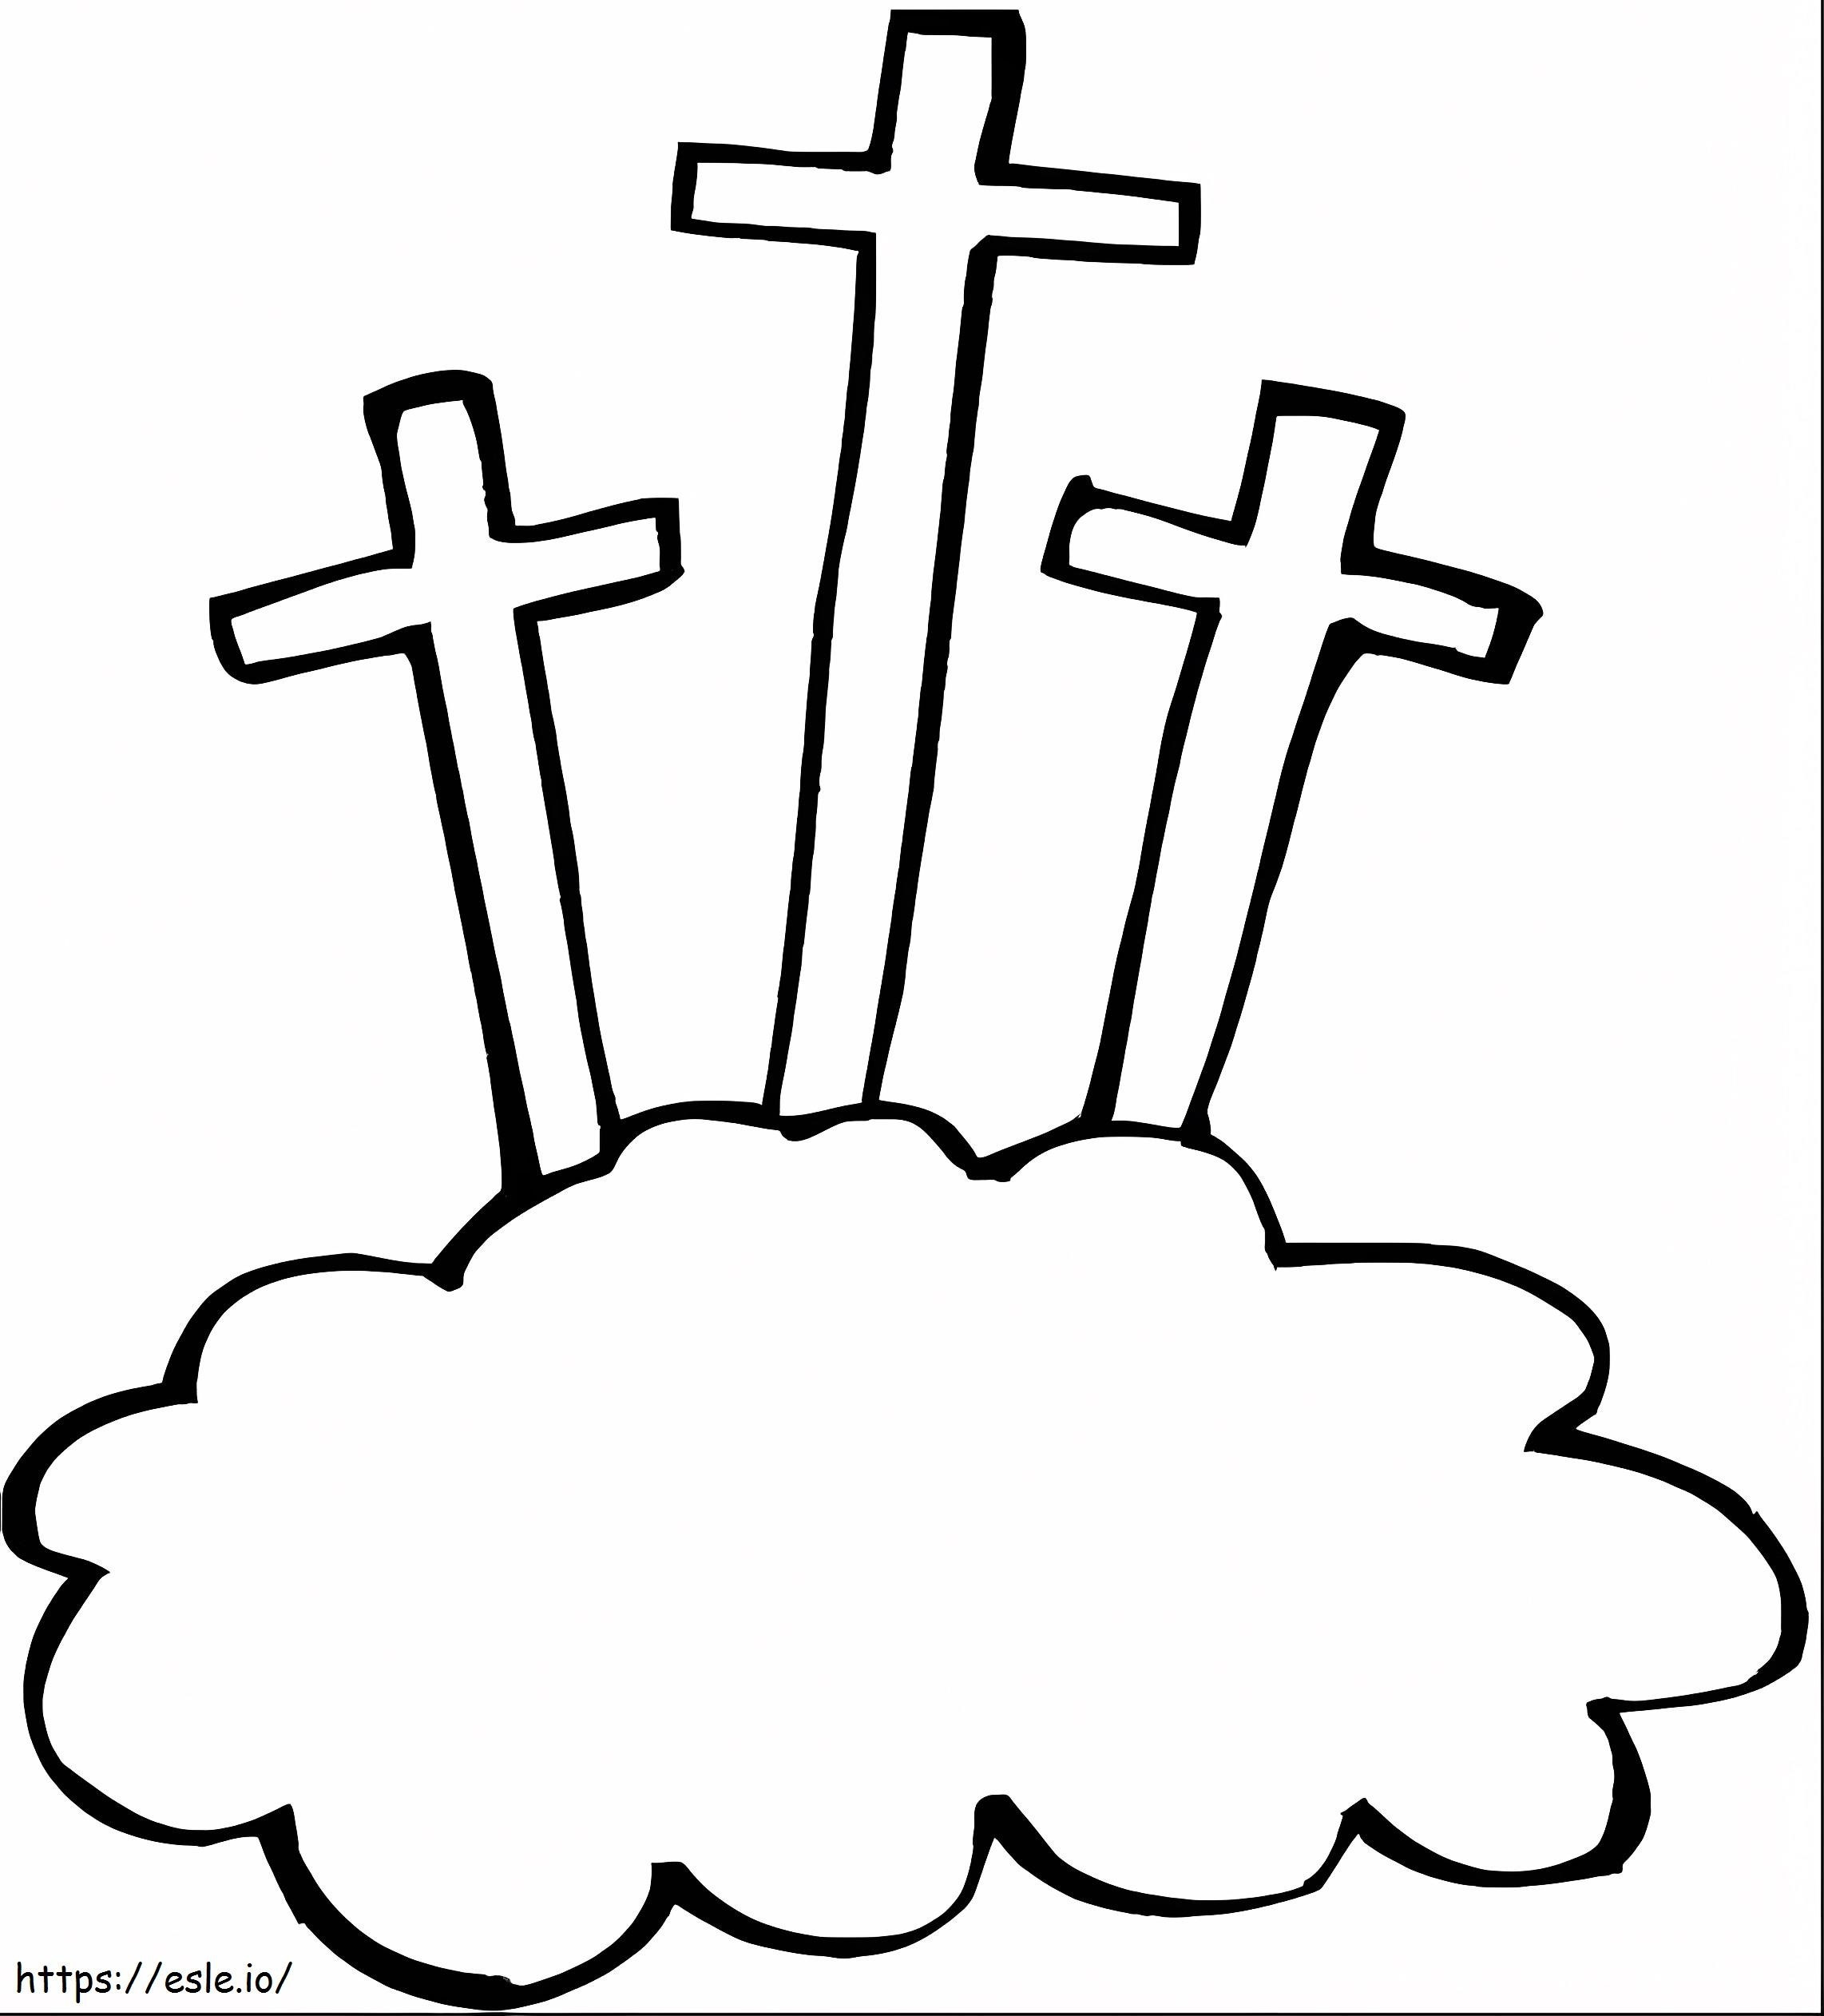 Good Friday 15 coloring page